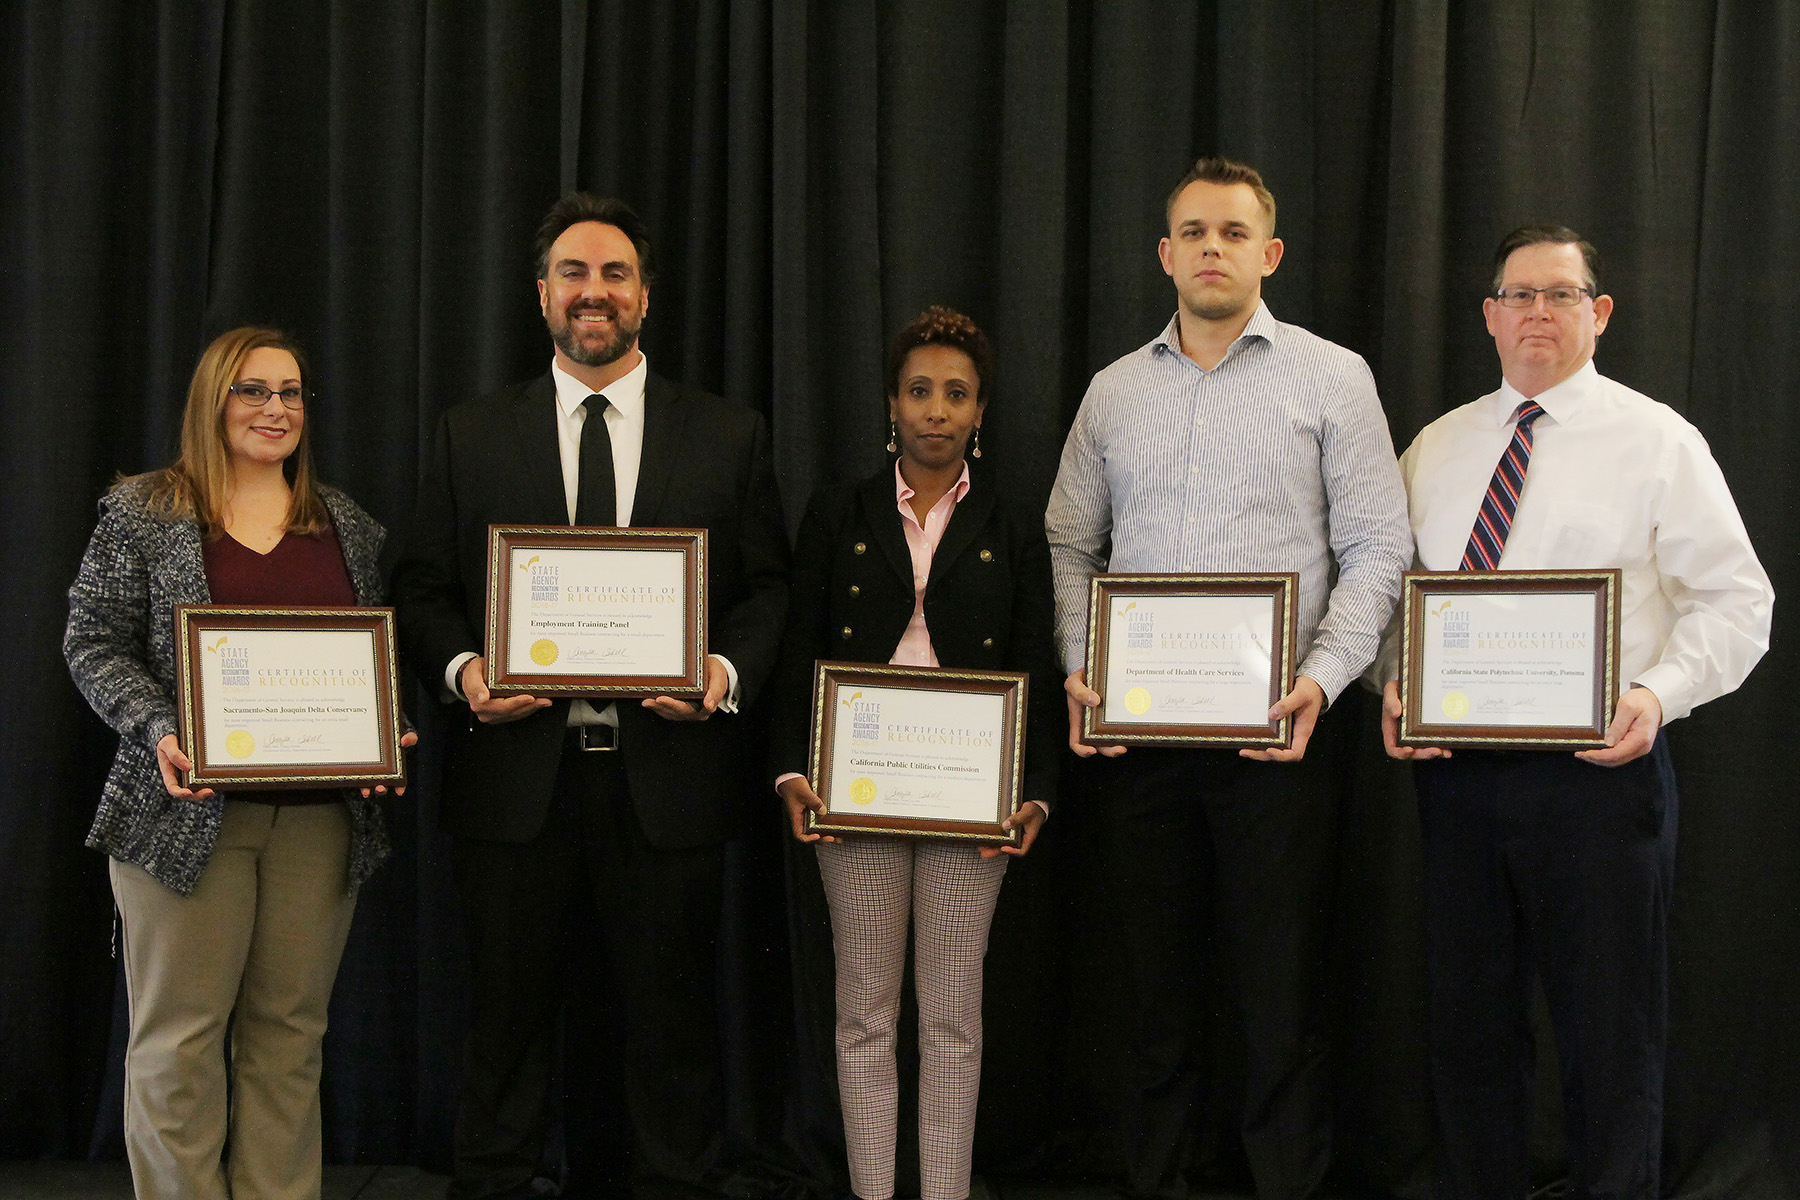 Most improved small business participation. Pictured from left to right: Sara Ward, Ryan Boyd, Bezawit Dilgassa, Max Lyulkin, and Duane Johnson